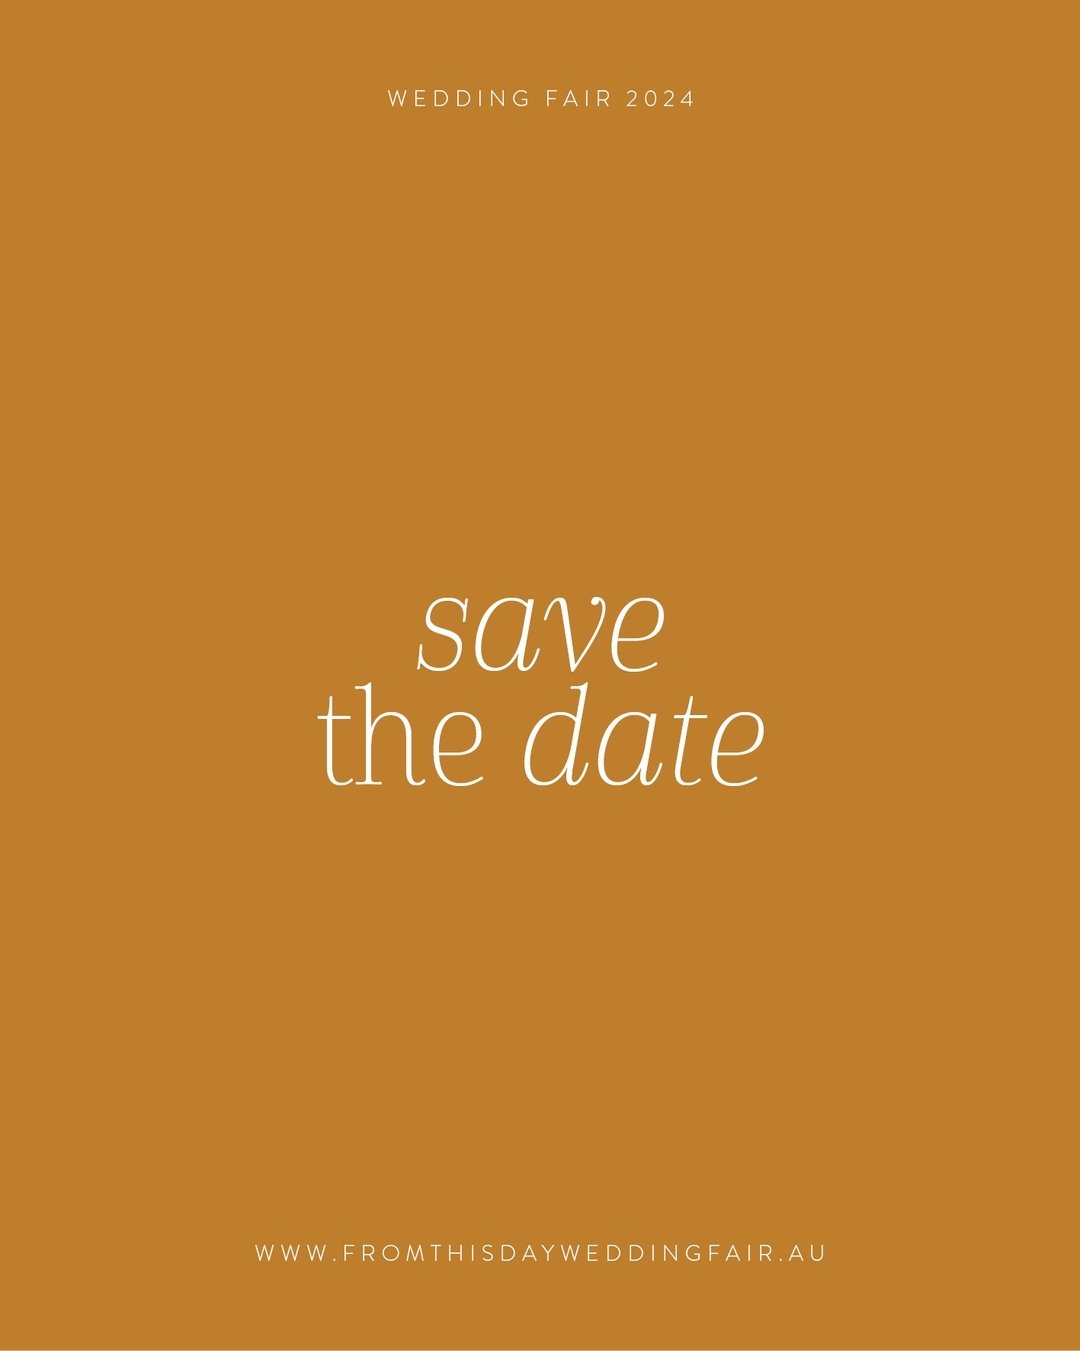 Have you secured your FREE event tickets yet? 

Simply head to the link in our bio and get yours today!

✨ Sunday 27 October
✨ Sabina River Farm
✨ 12:00pm - 3:00pm
✨ Food, drinks, live music, heaps of wedding inspo and local vendors

We can't wait to